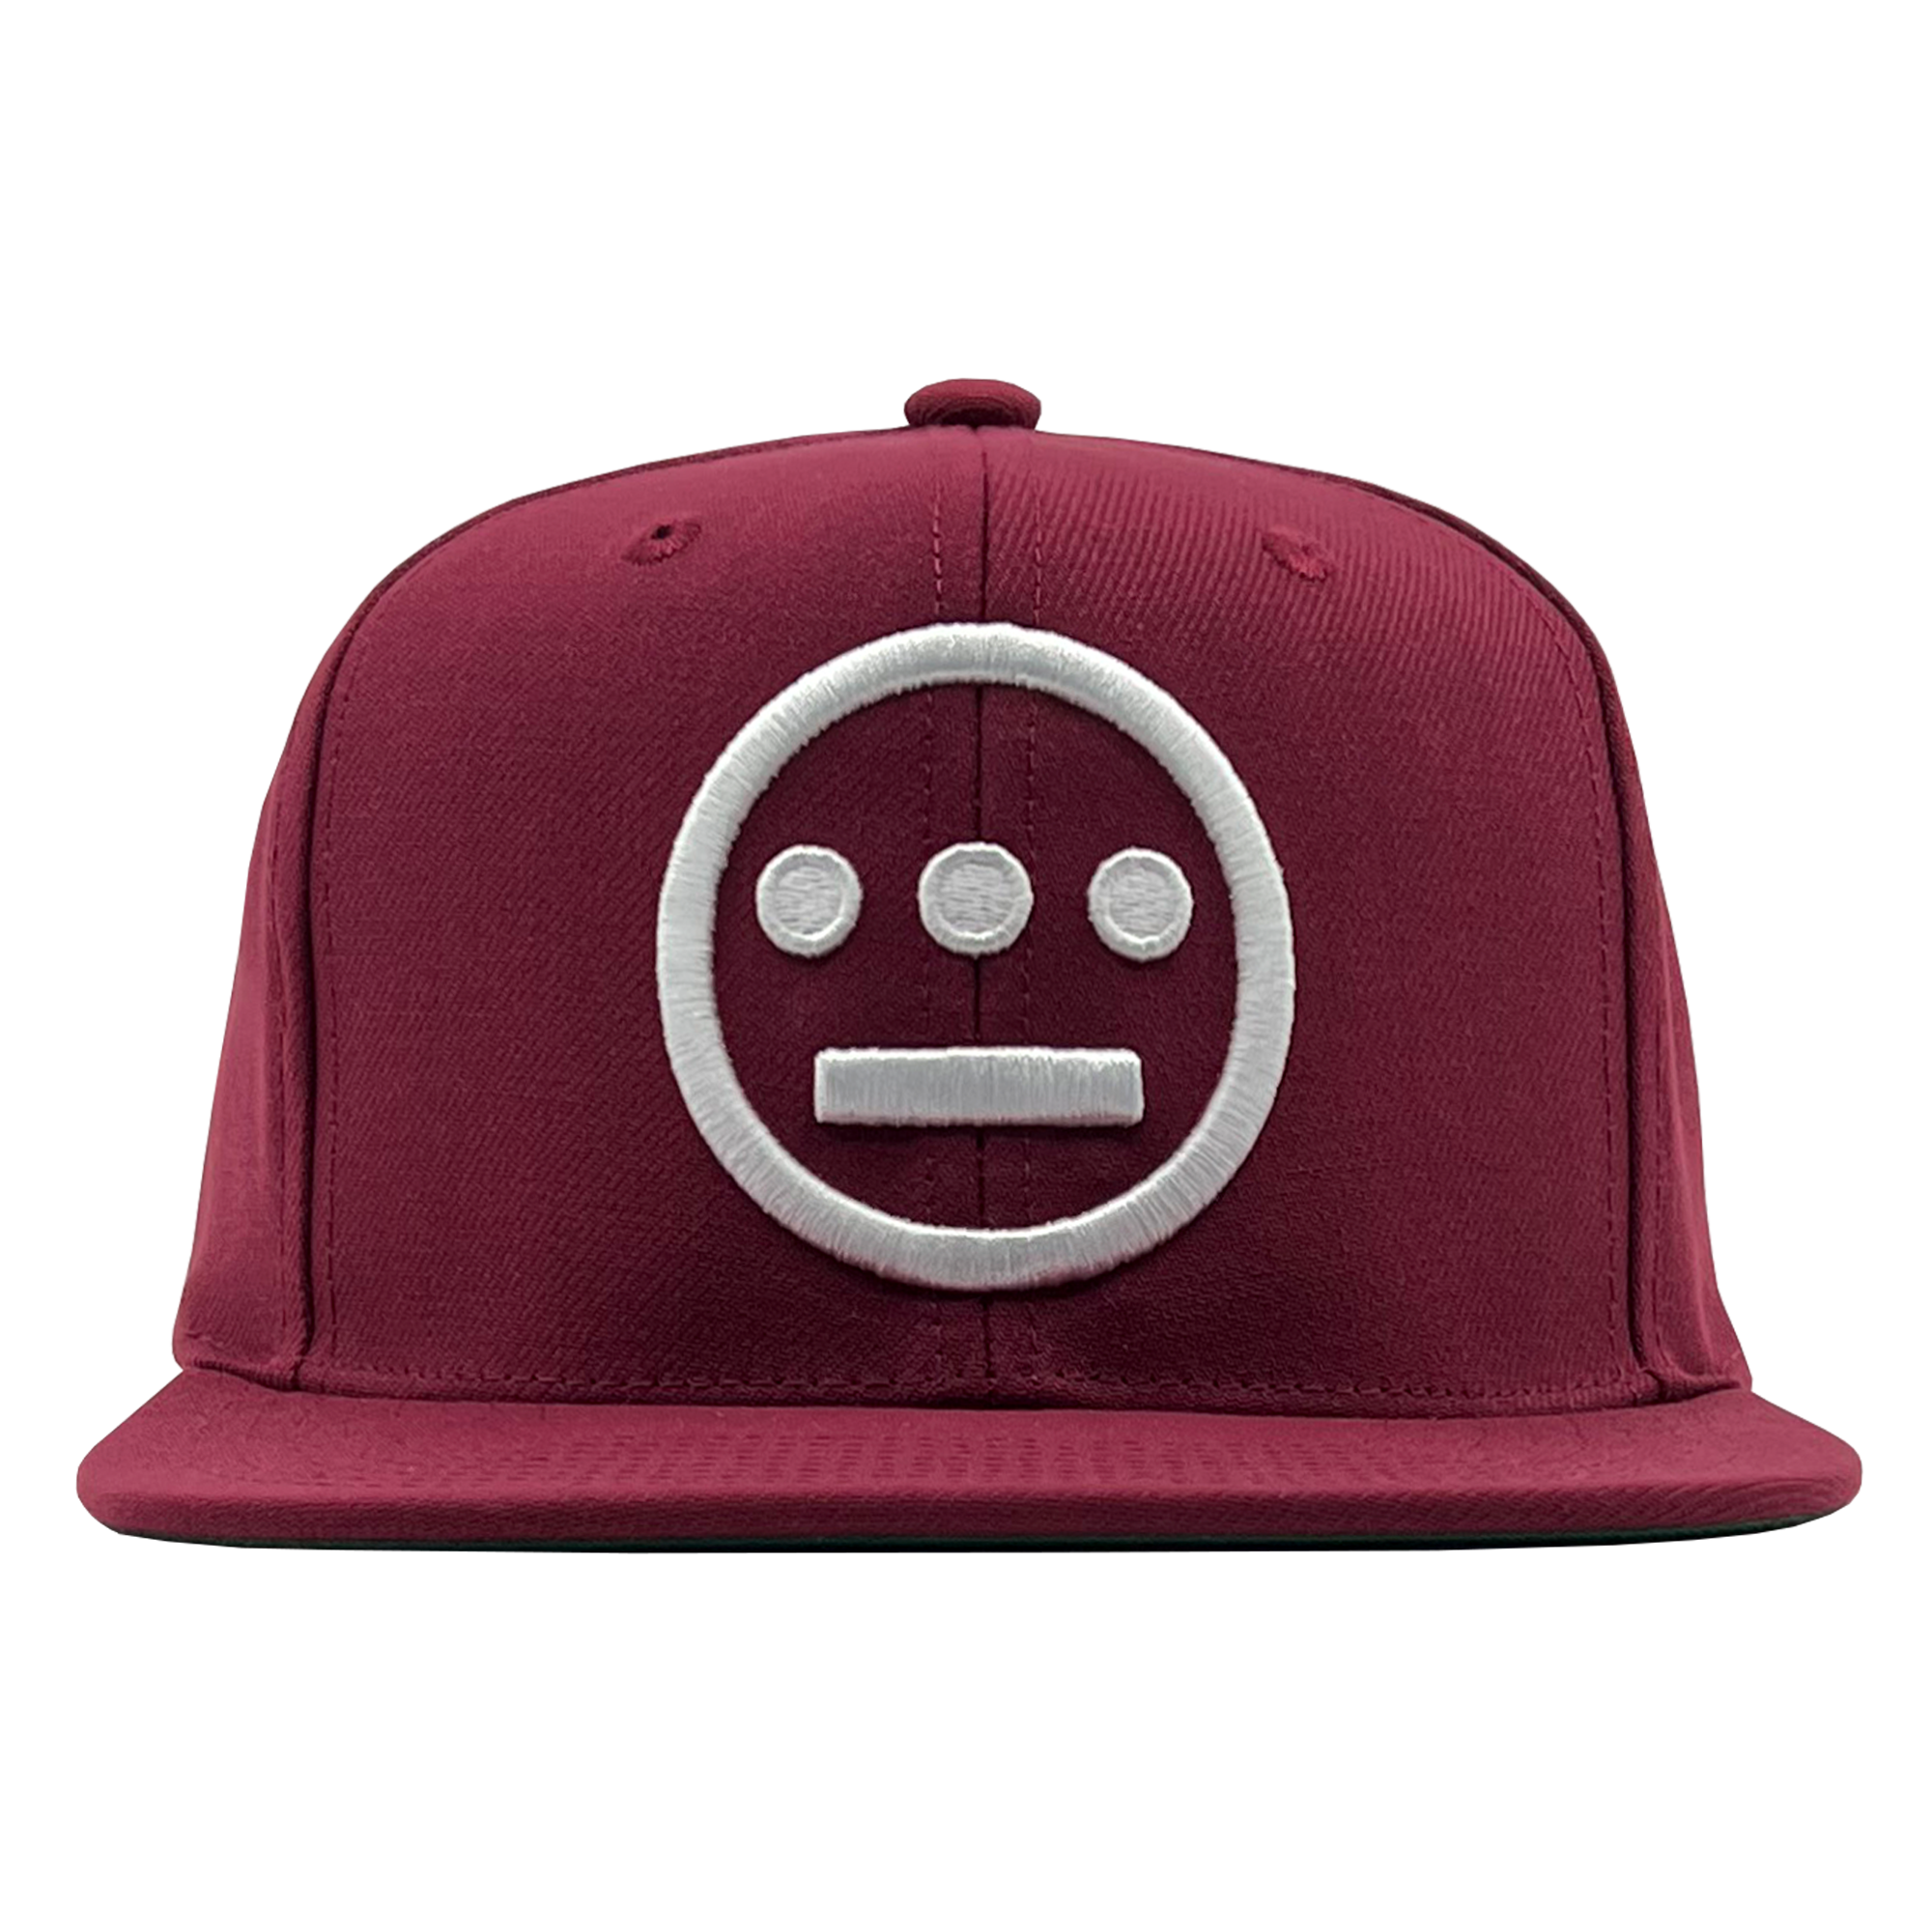 Front view of cardinal red Mitchell & Ness snapback cap with white embroidered Hiero Hip Hop crew logo.